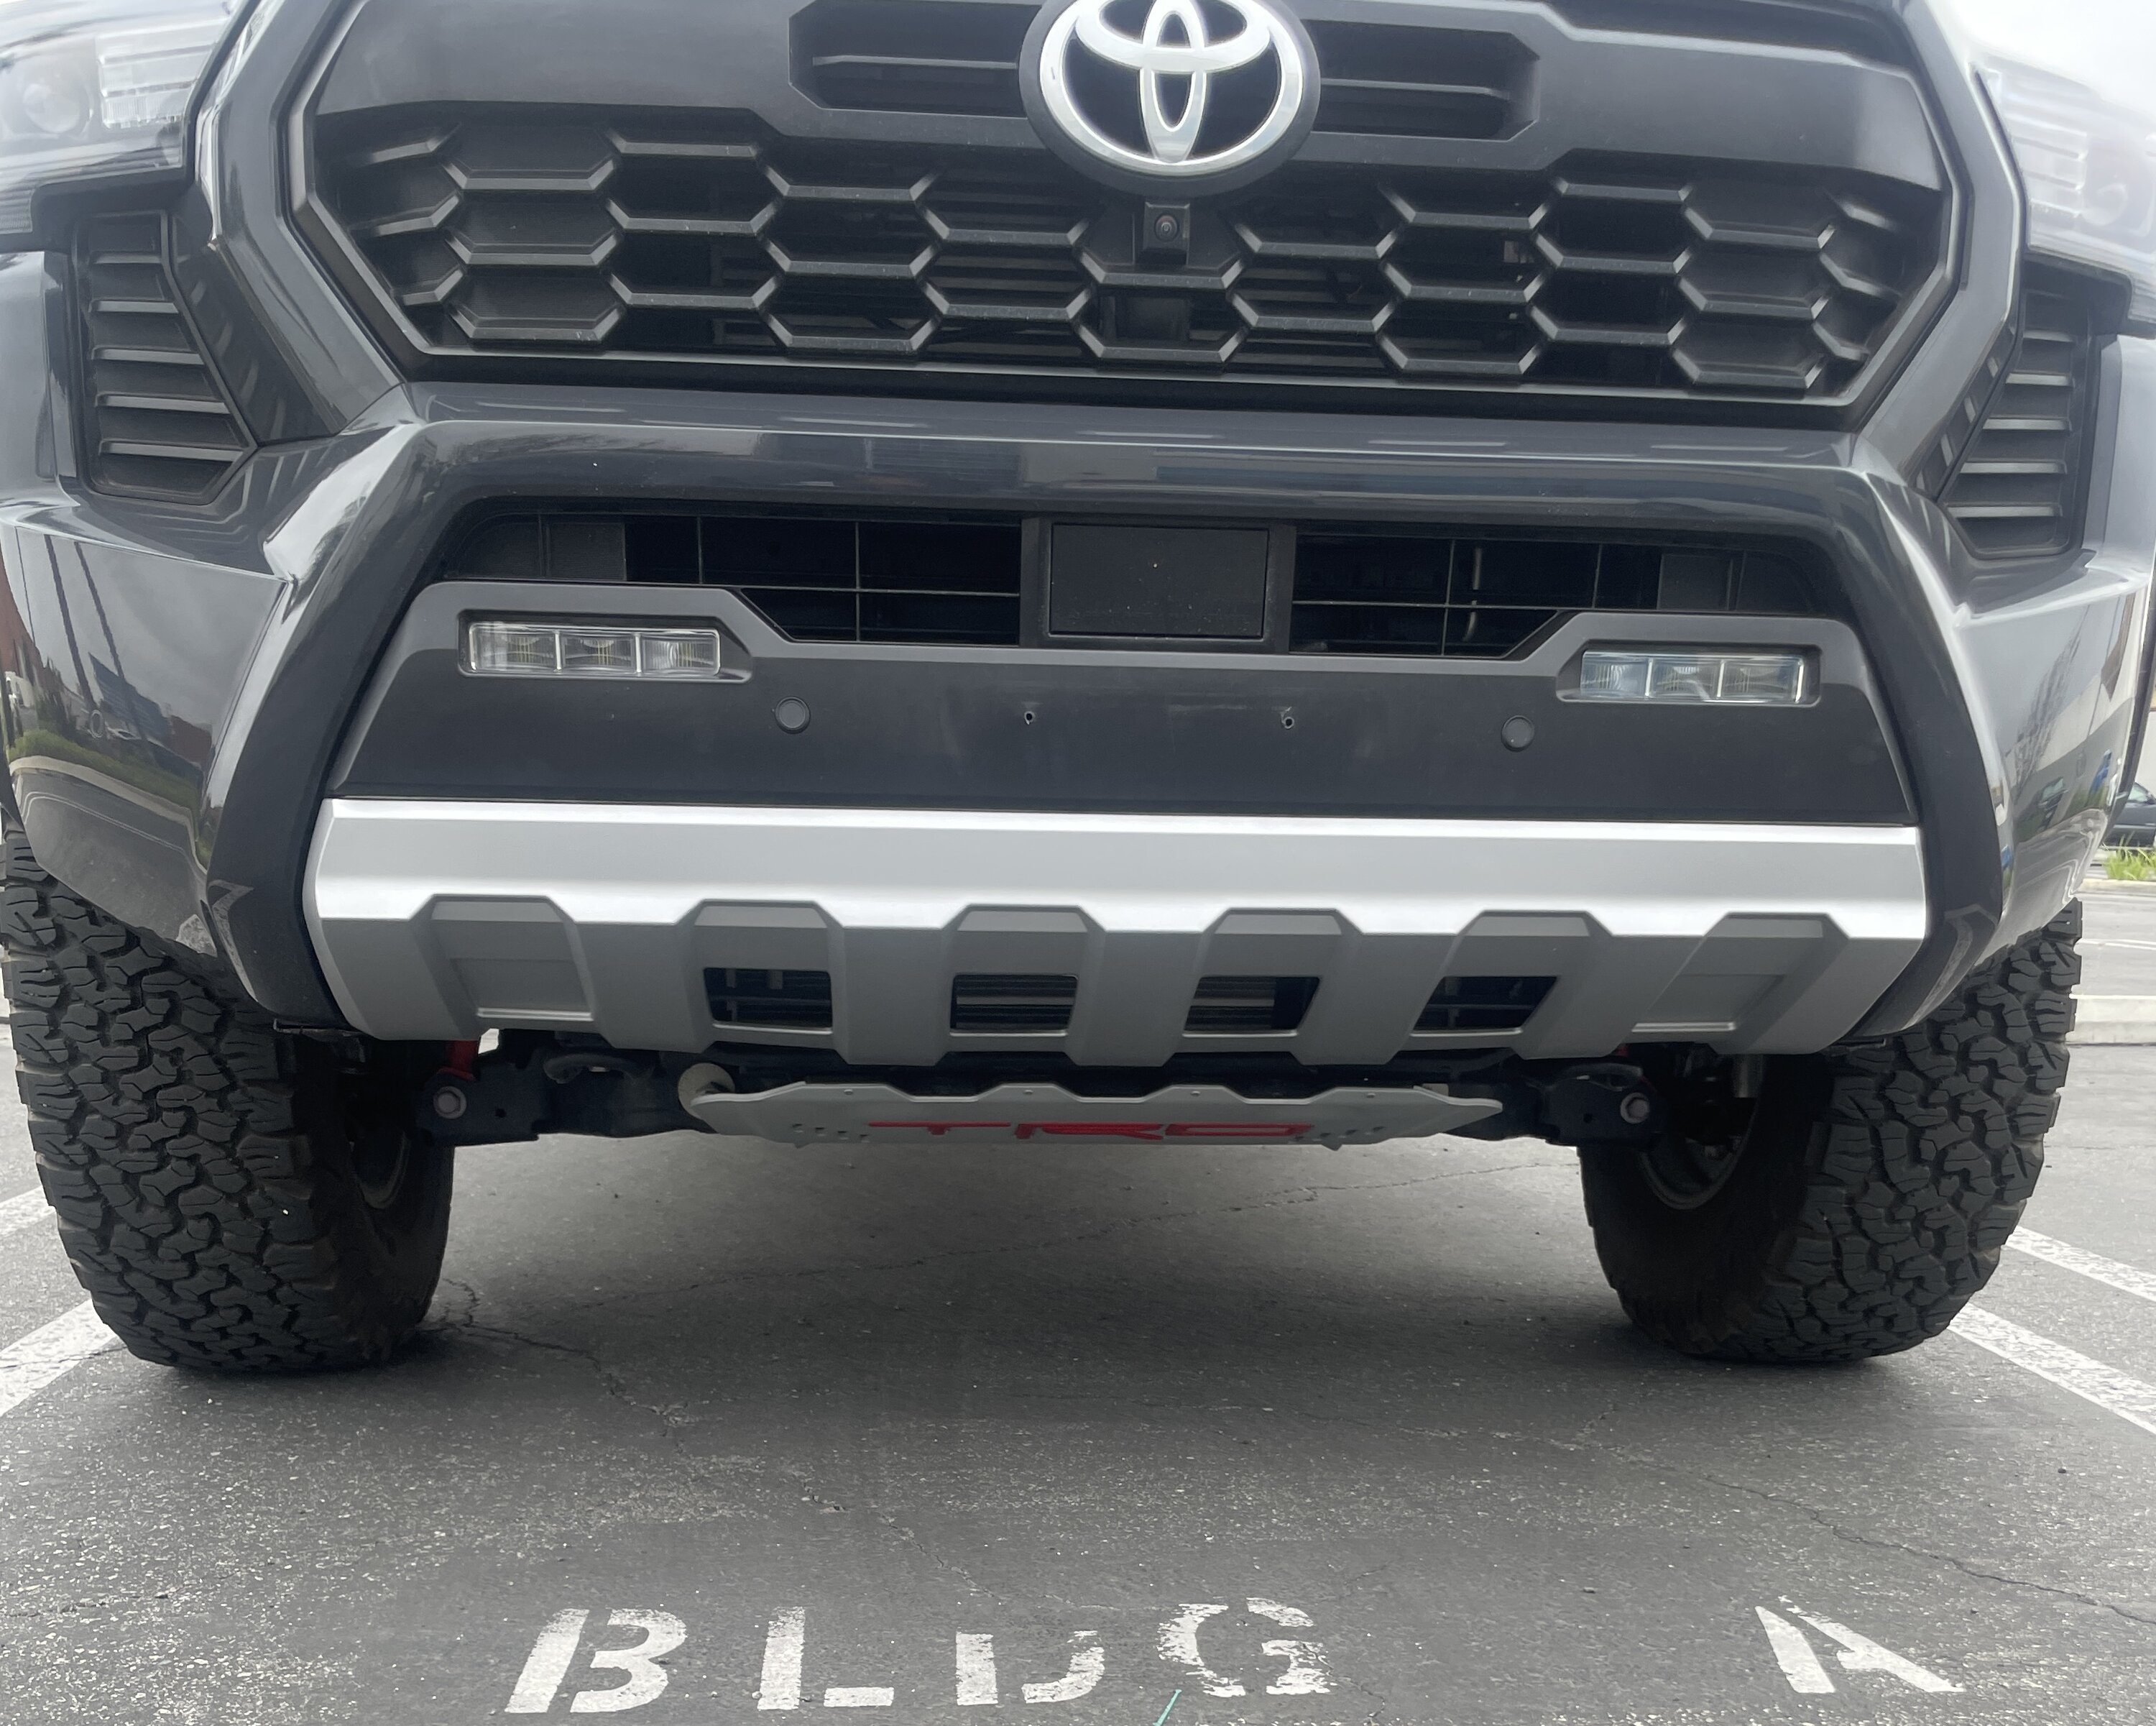 2024 Tacoma Black lower valance swapped with Trailhunter silver valence IMG_0573